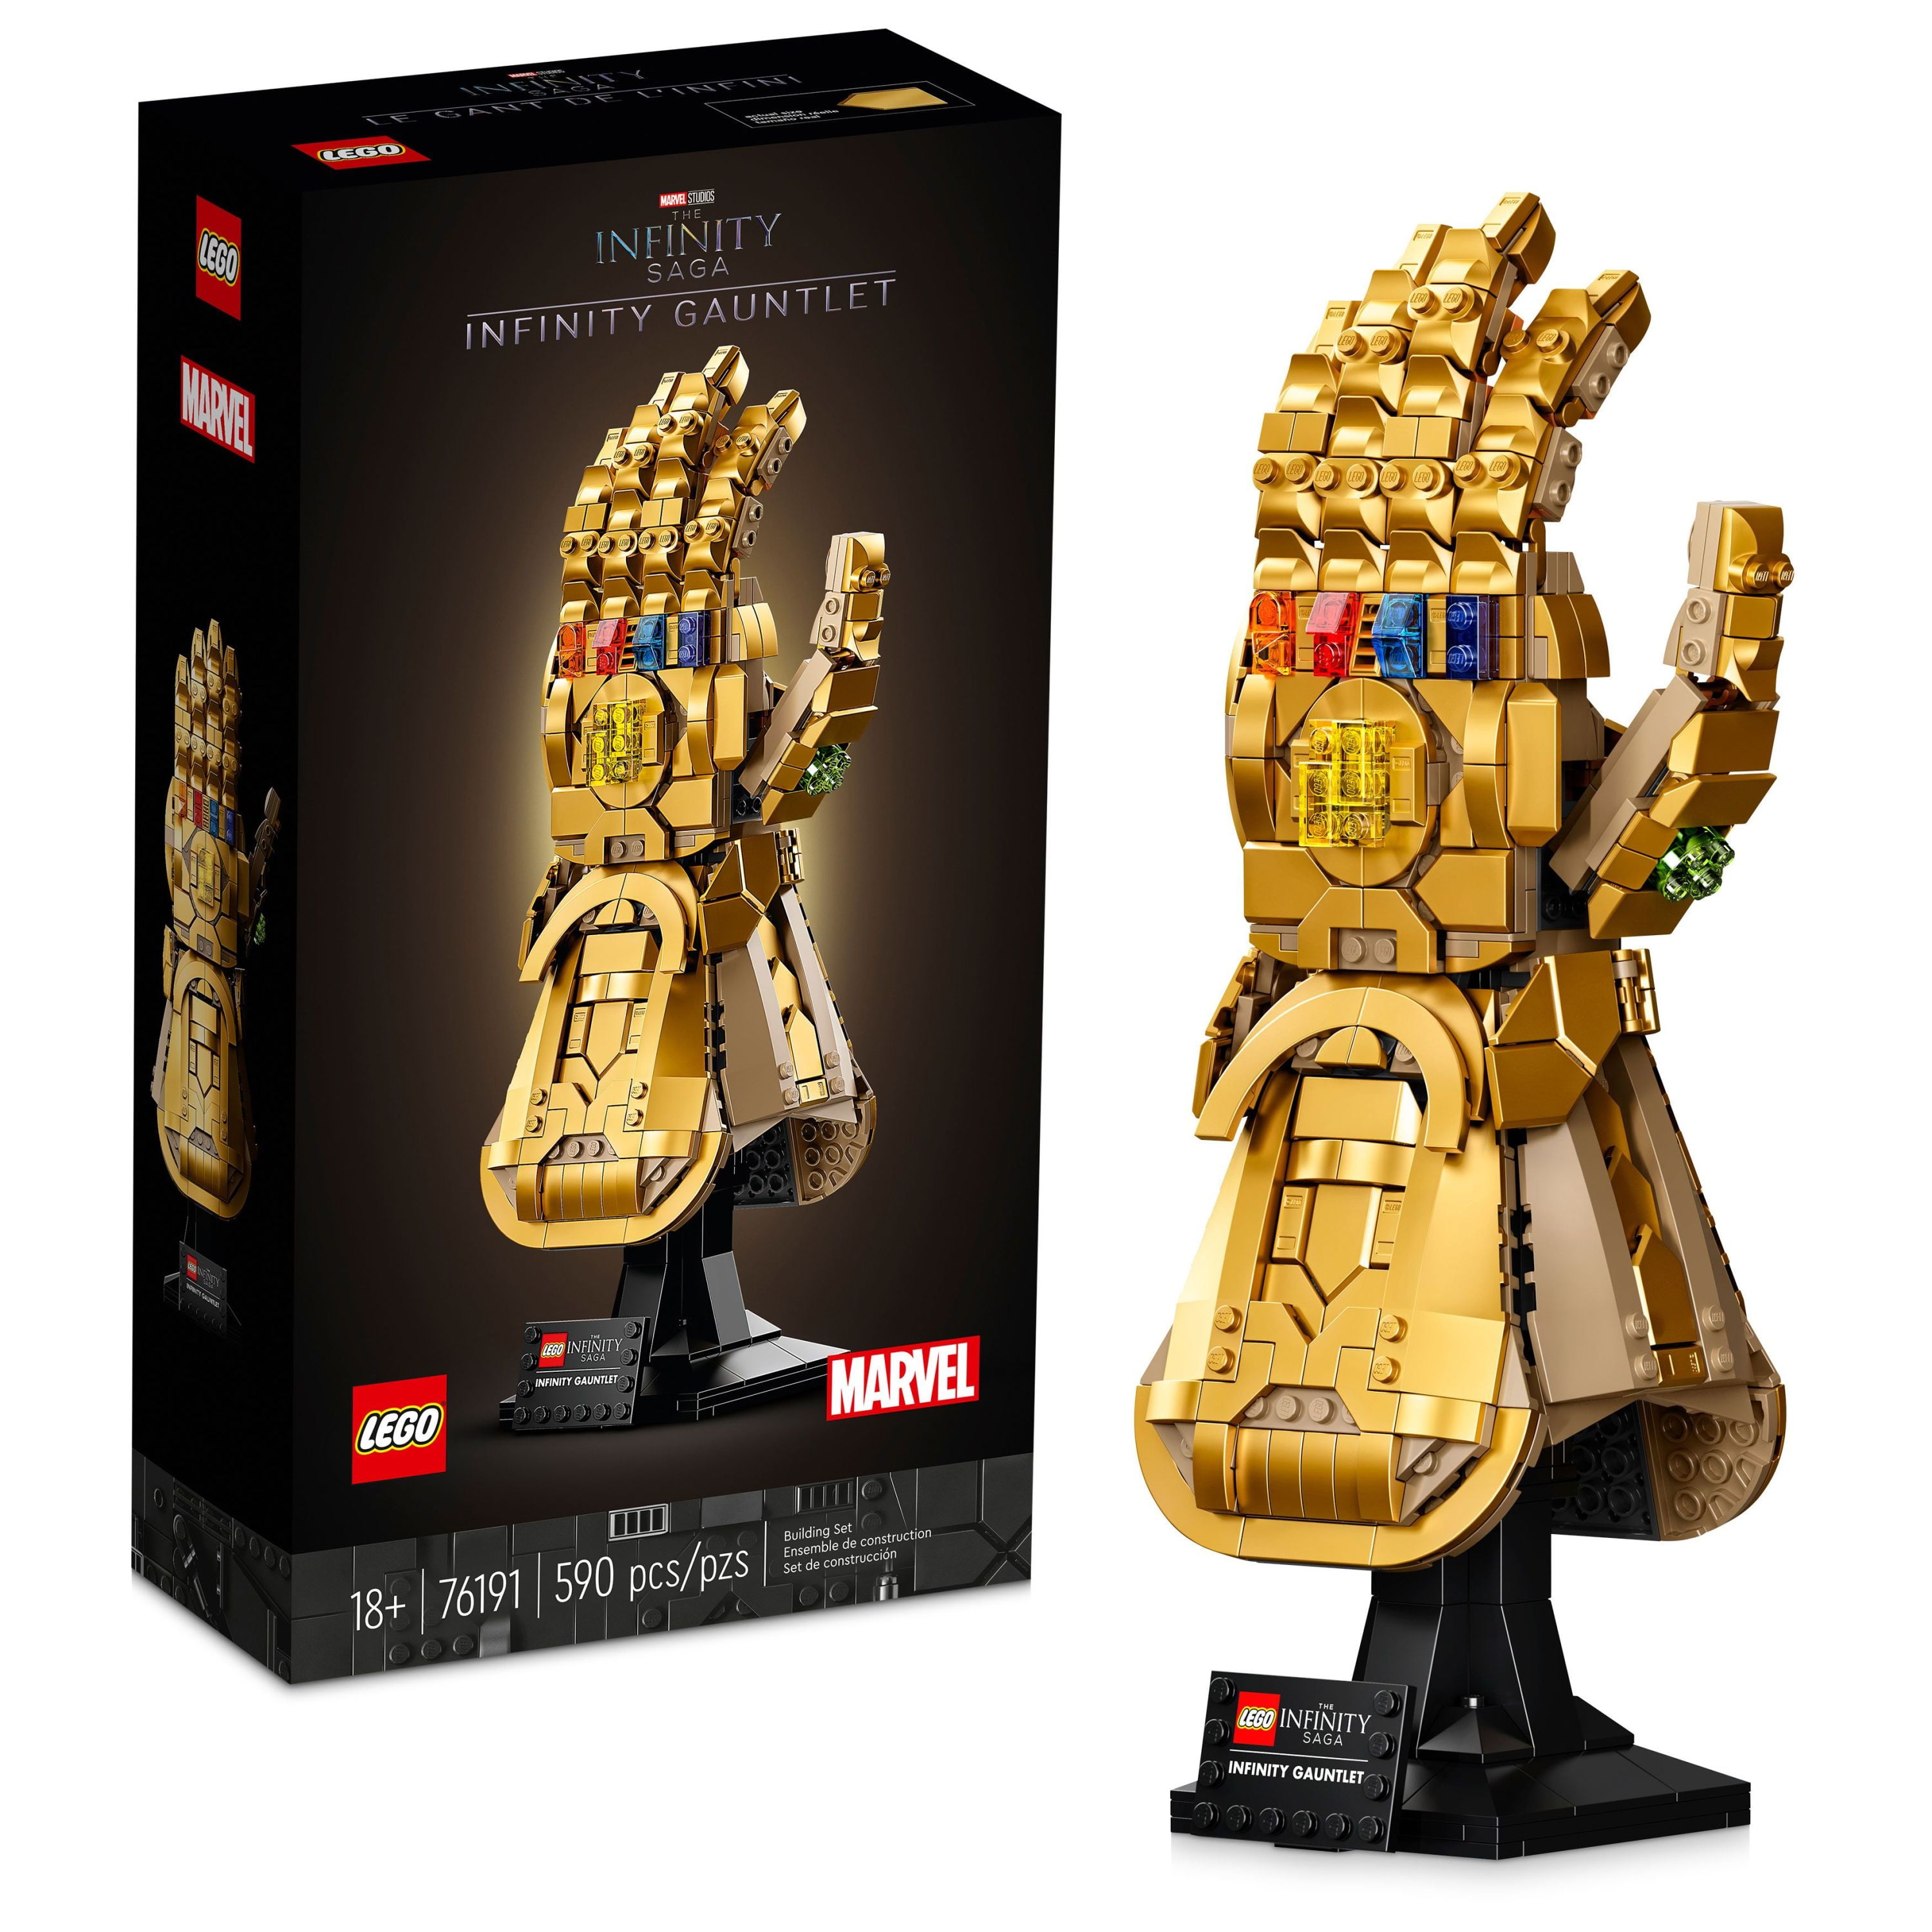 LEGO Marvel Infinity Gauntlet Set 76191, Collectible Thanos Glove with Infinity Stones, Collectible Avengers Gift for Men, Women, Him, Her, Model Kits for Adults to Build